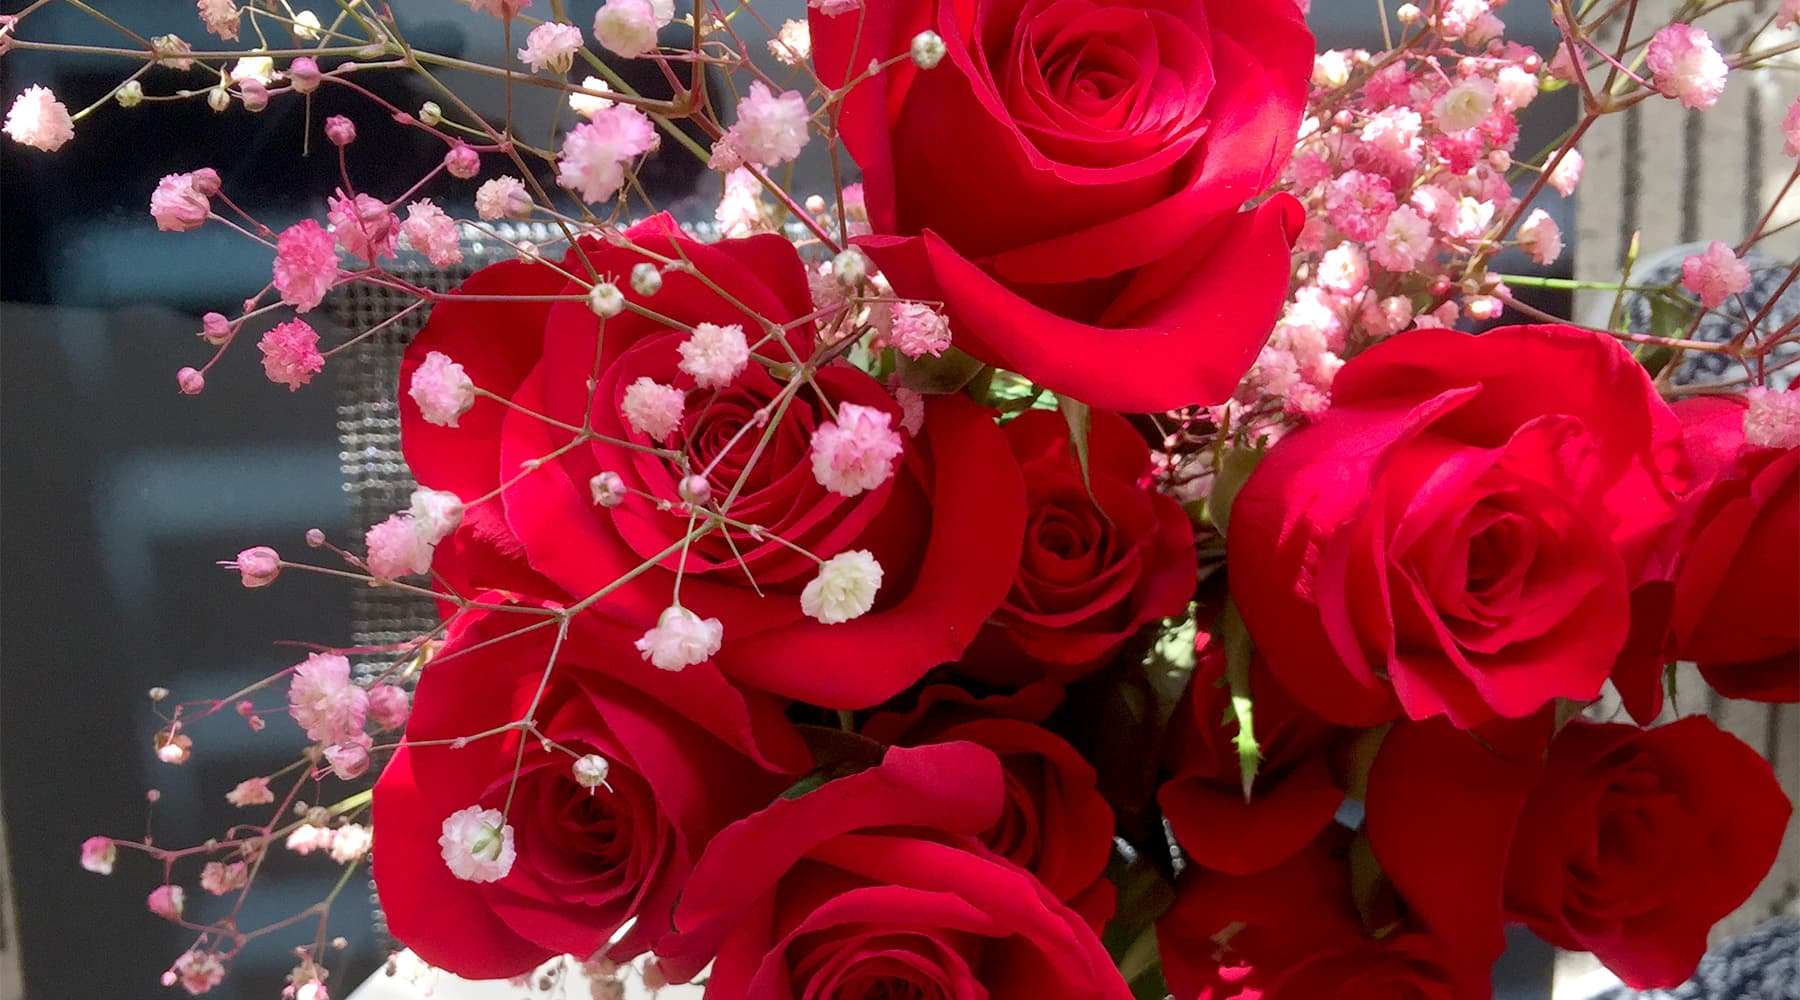 Red Roses and Symbols of Love